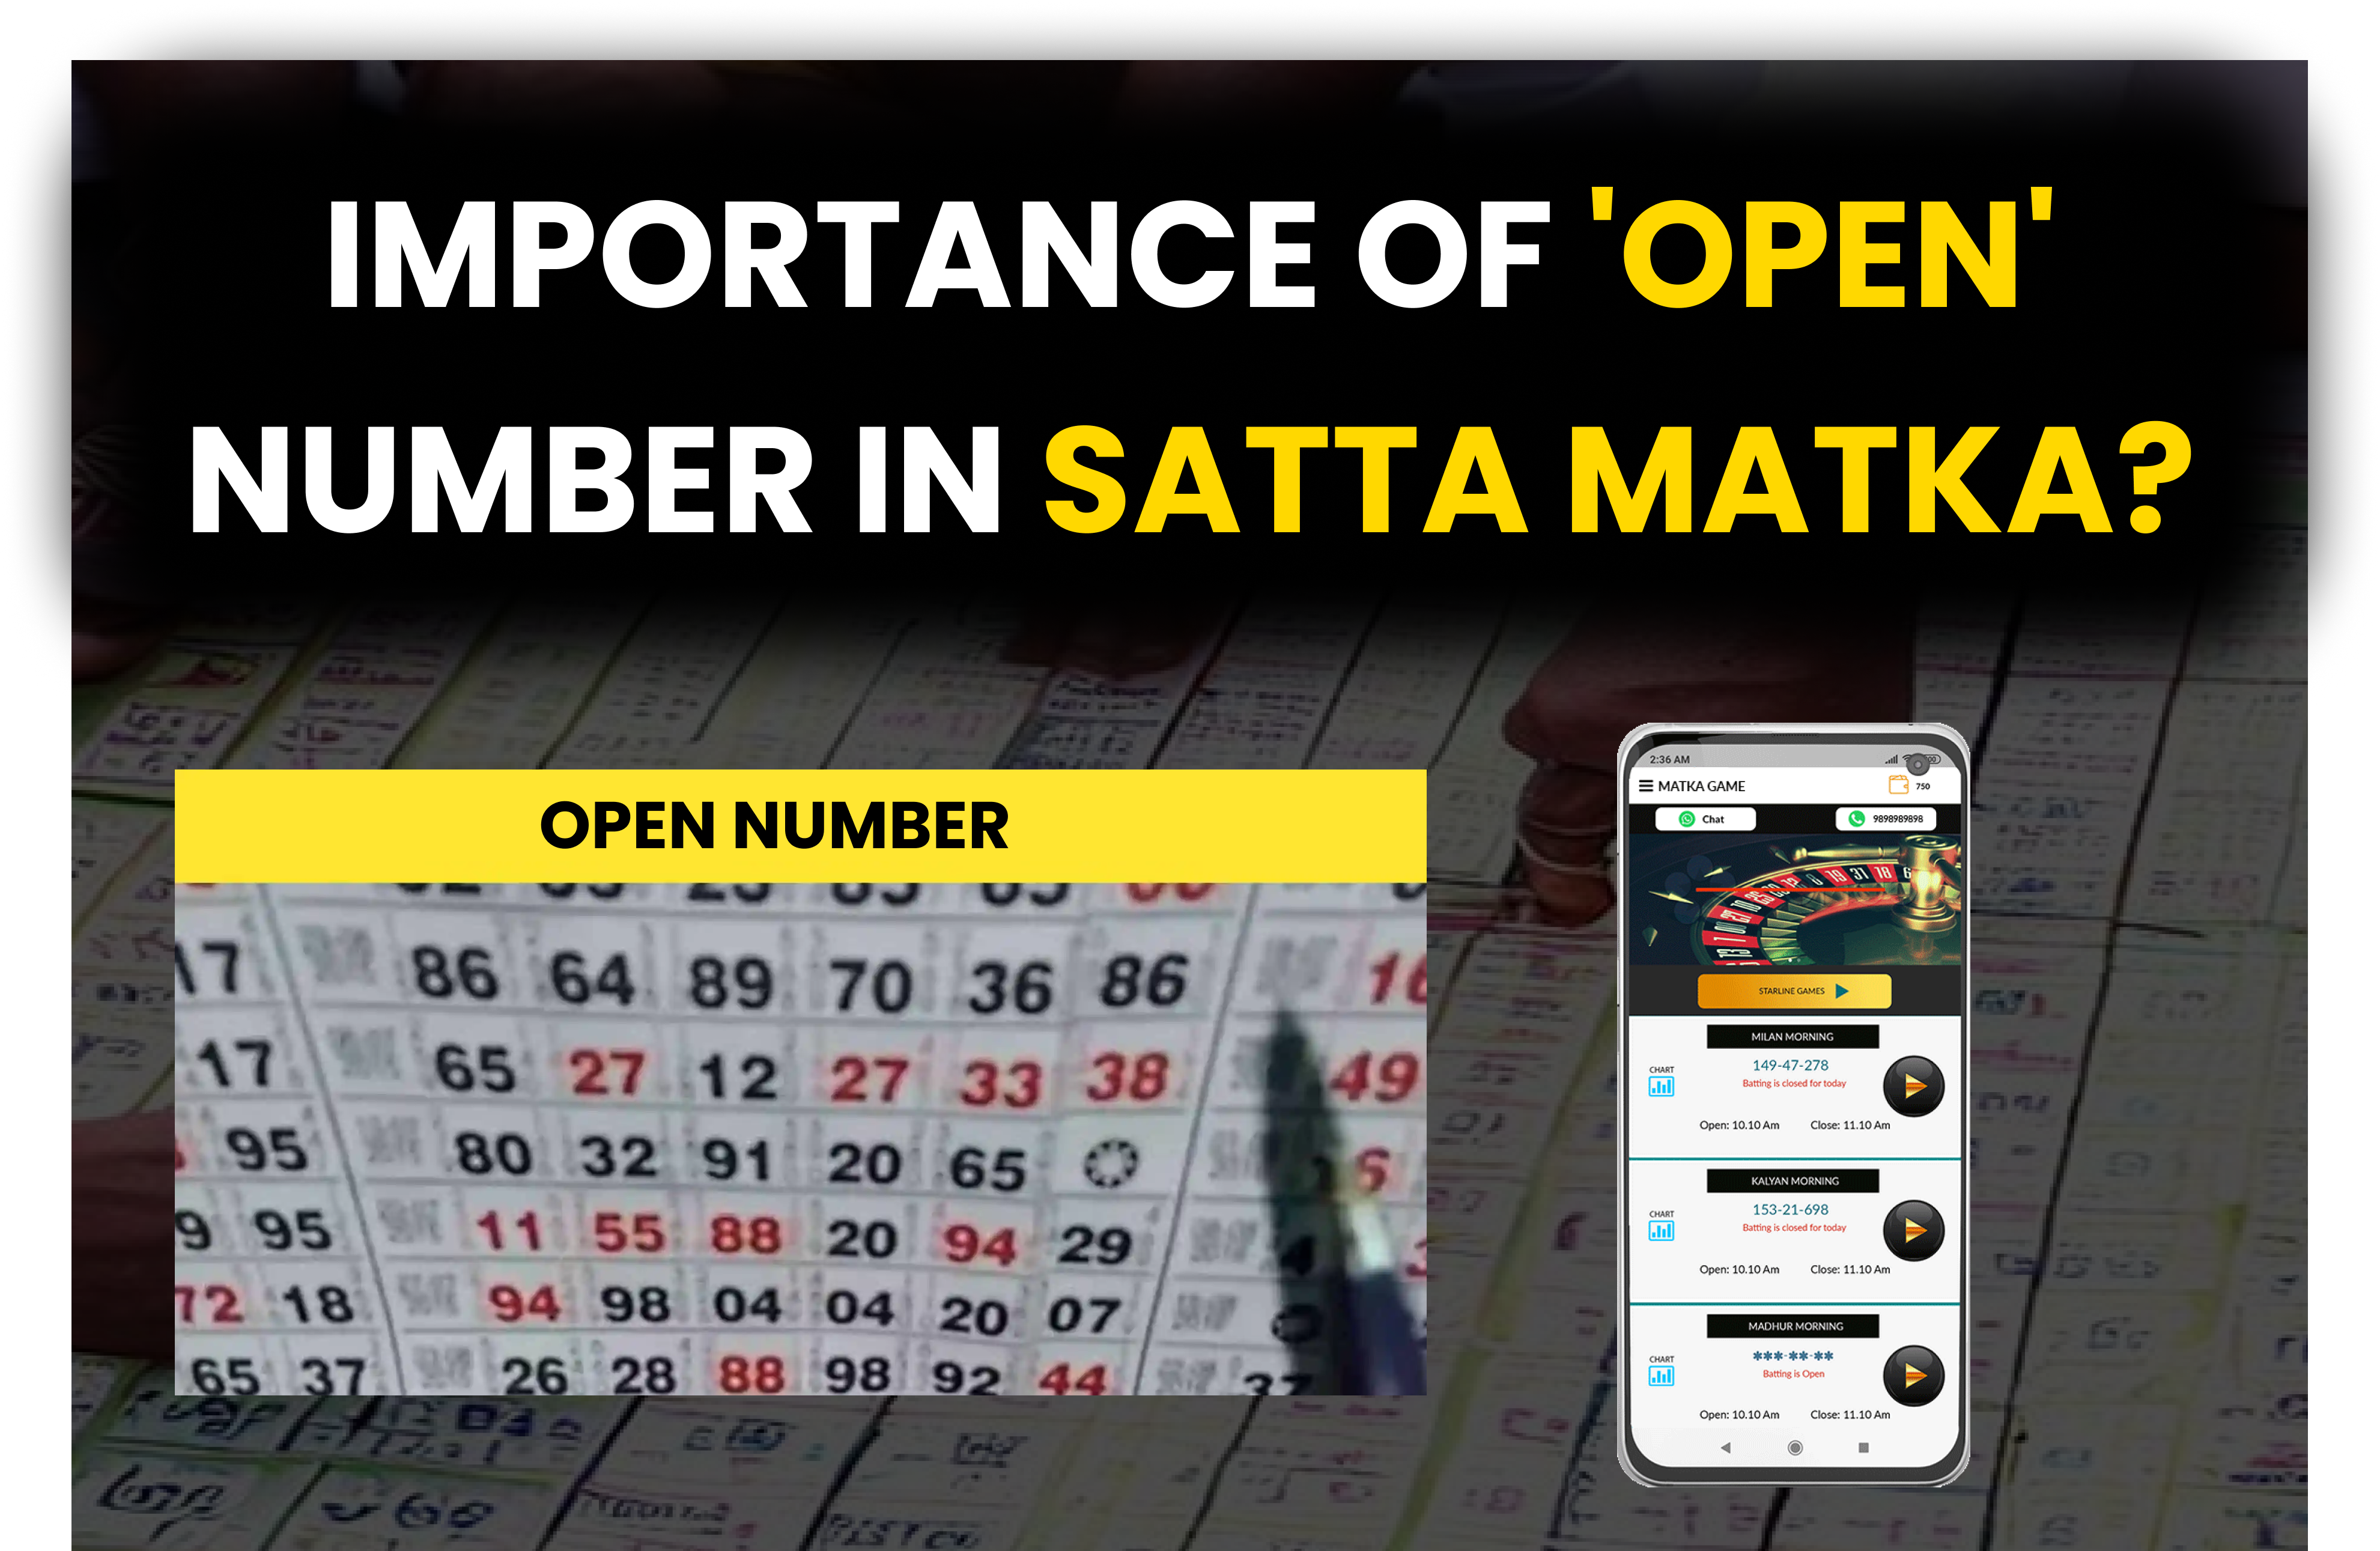 Importance of 'OPEN' Number in Satta Matka?